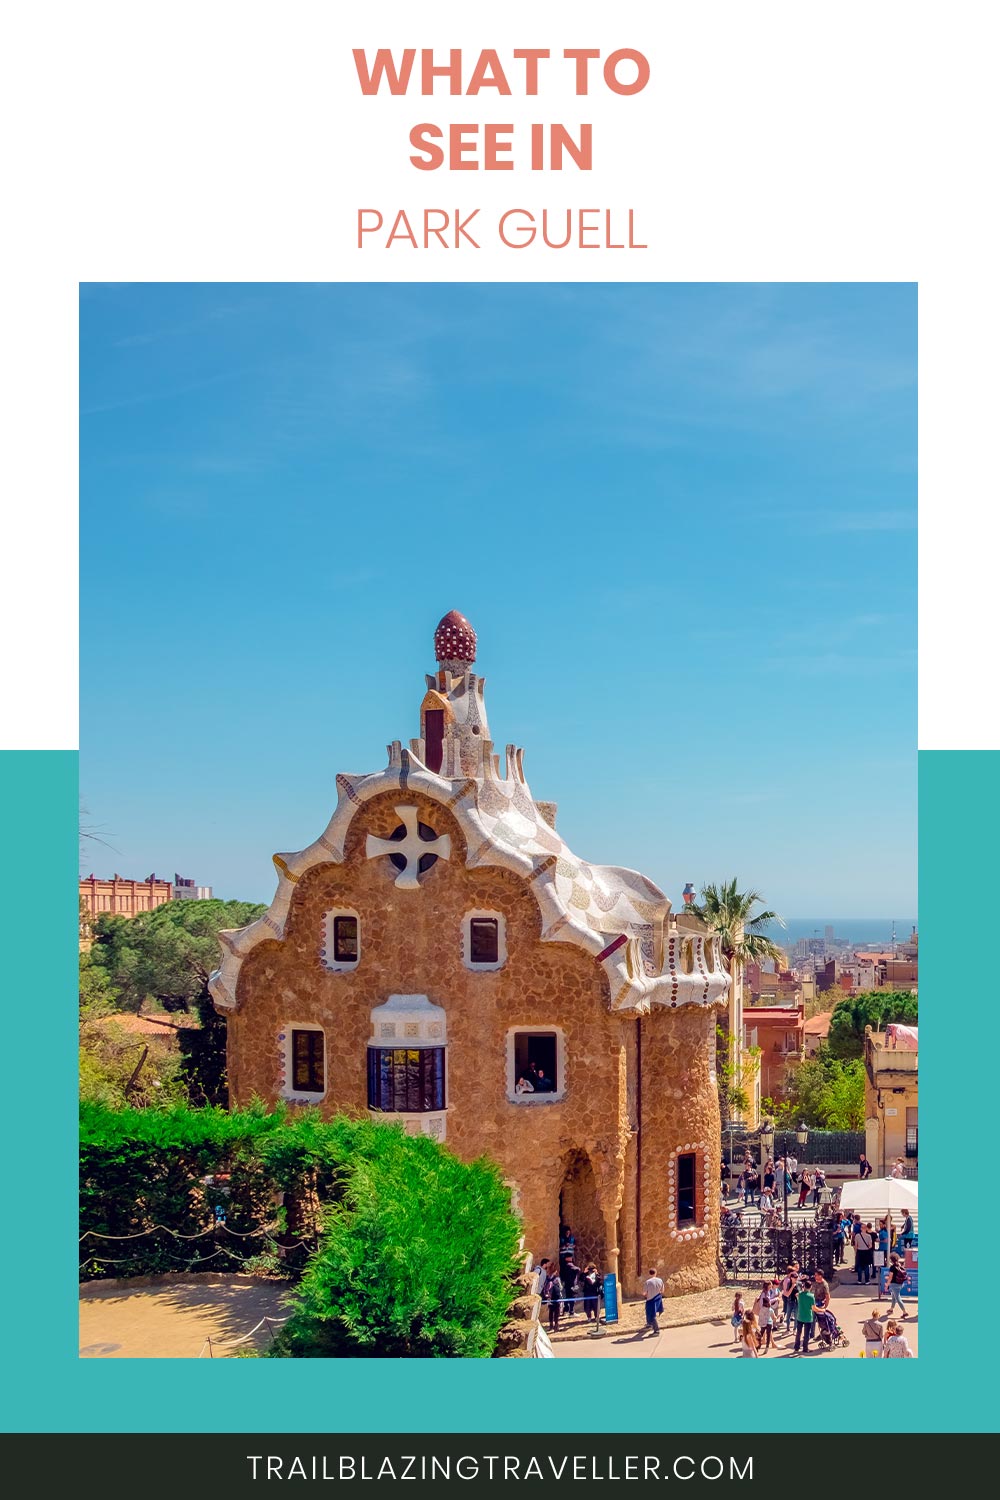 A Church in Park Guell - What to see here?